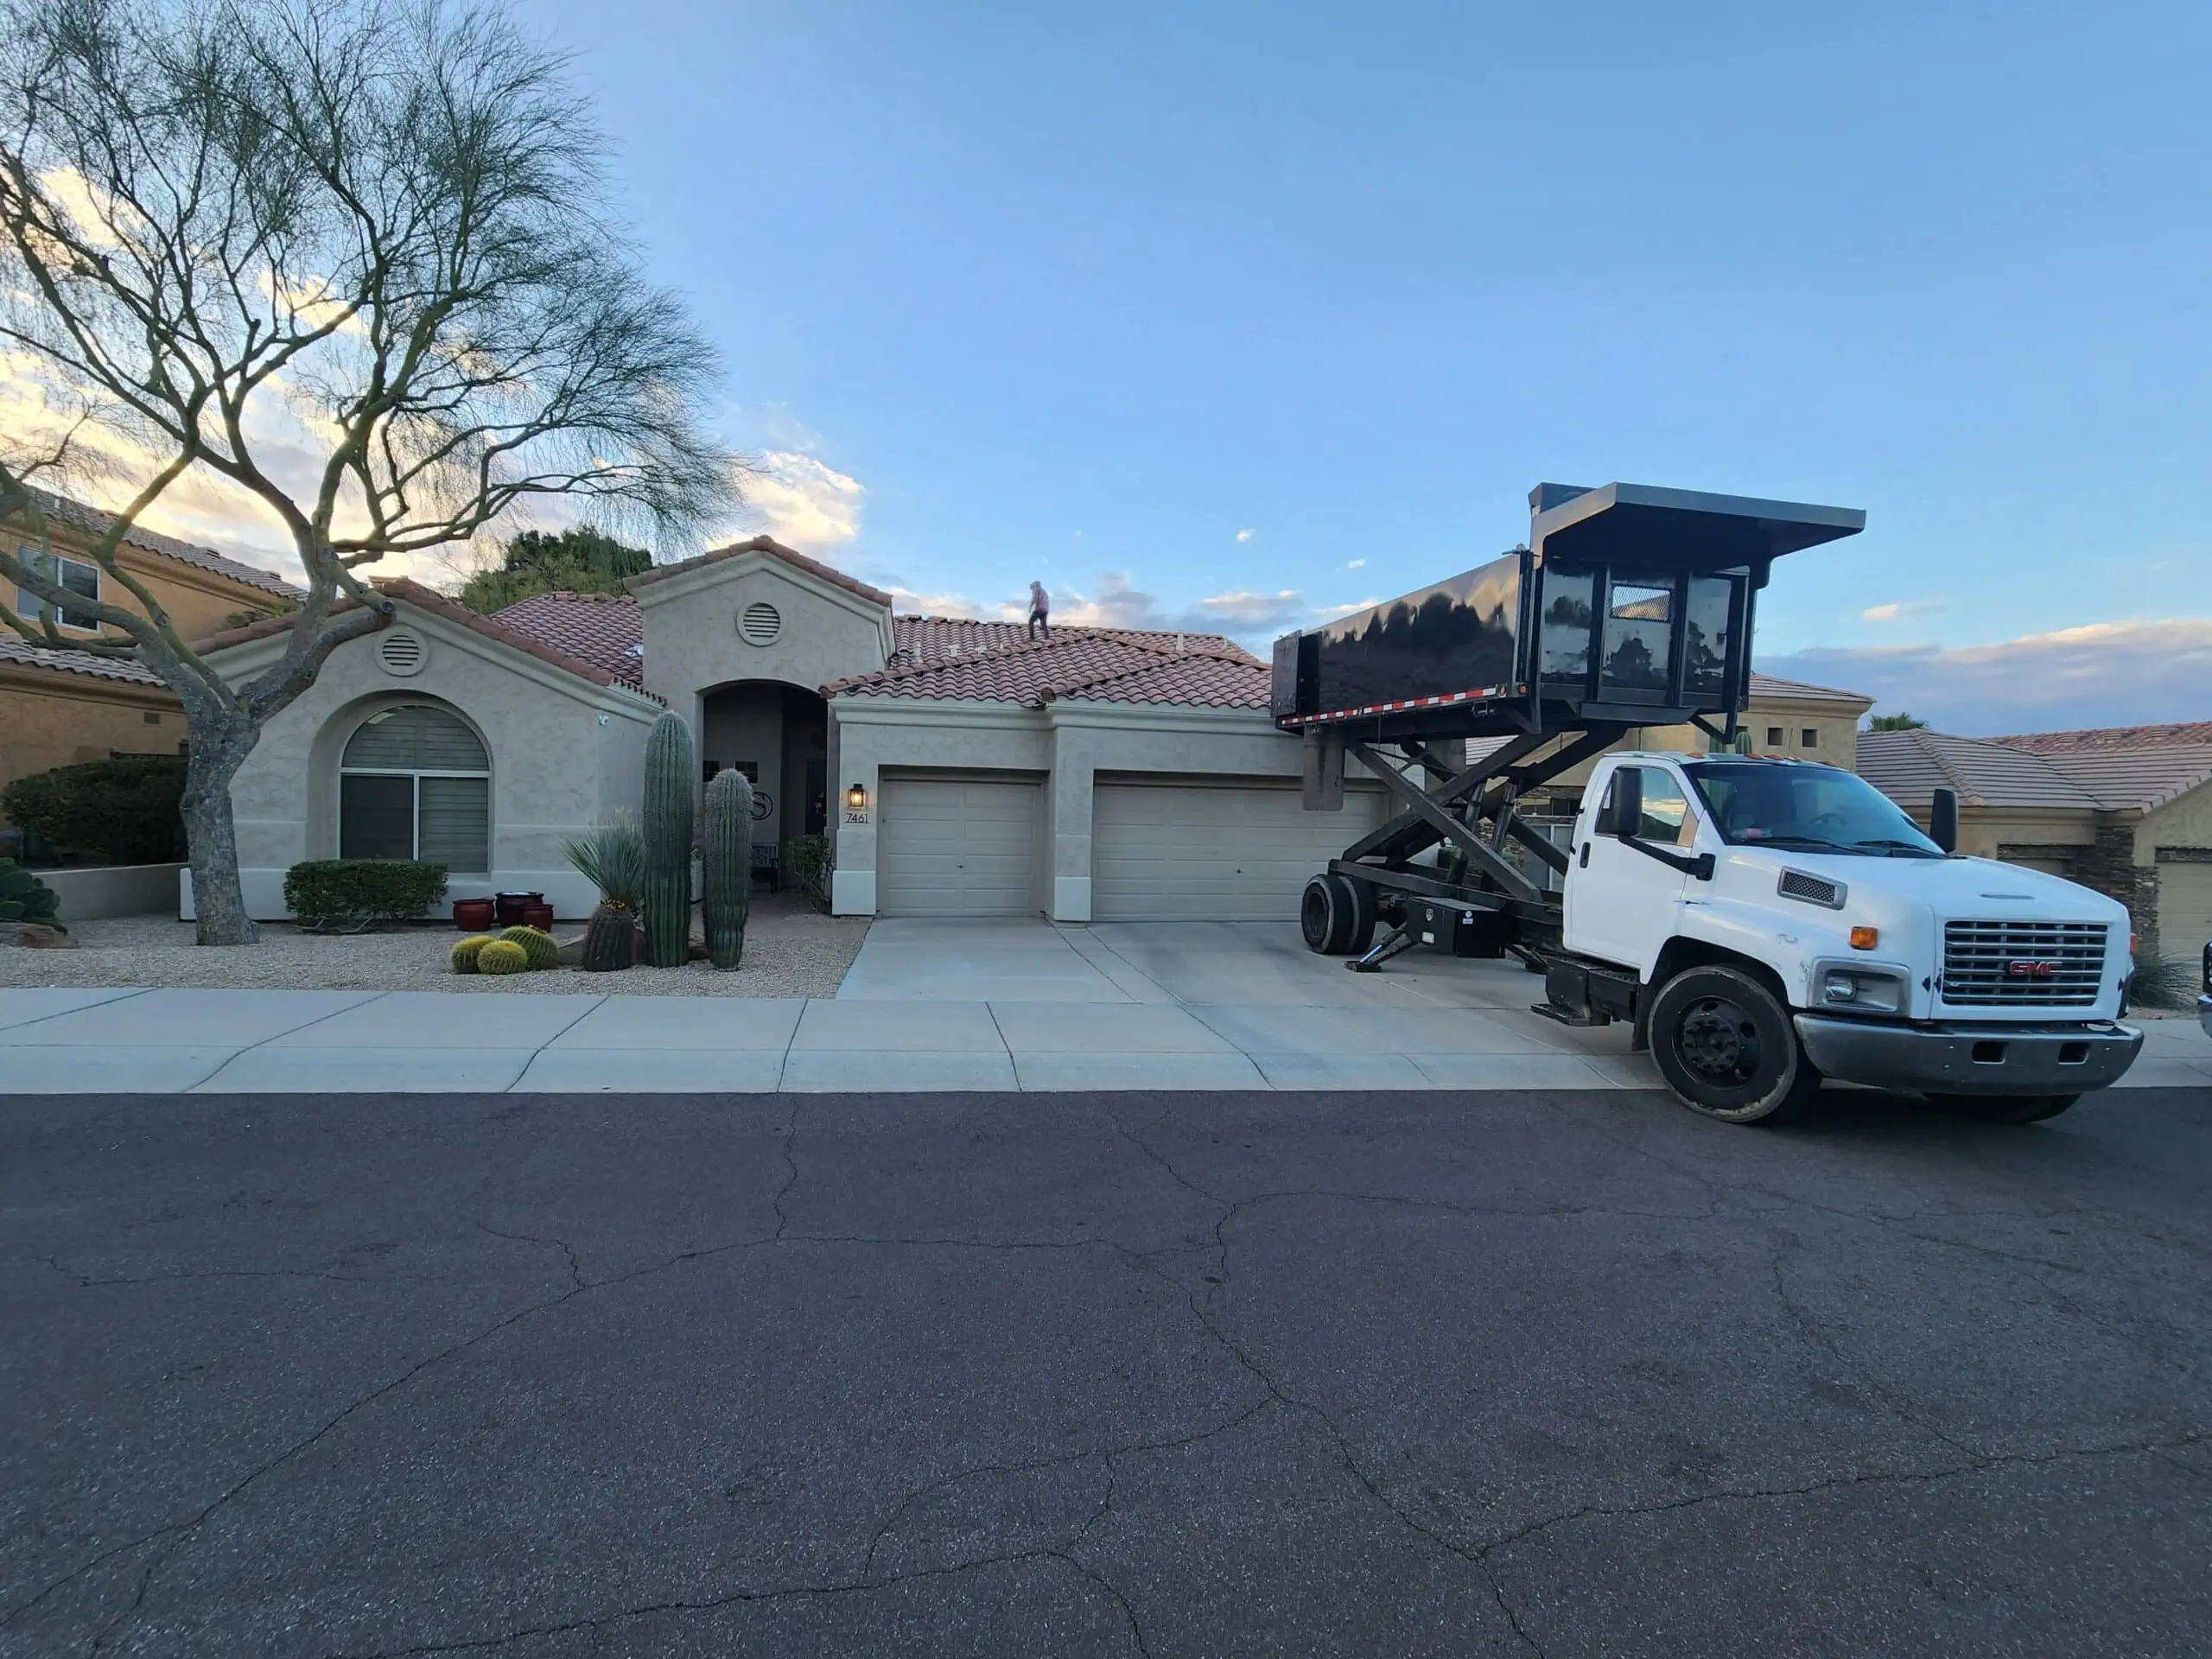 cave creek re roof brand new